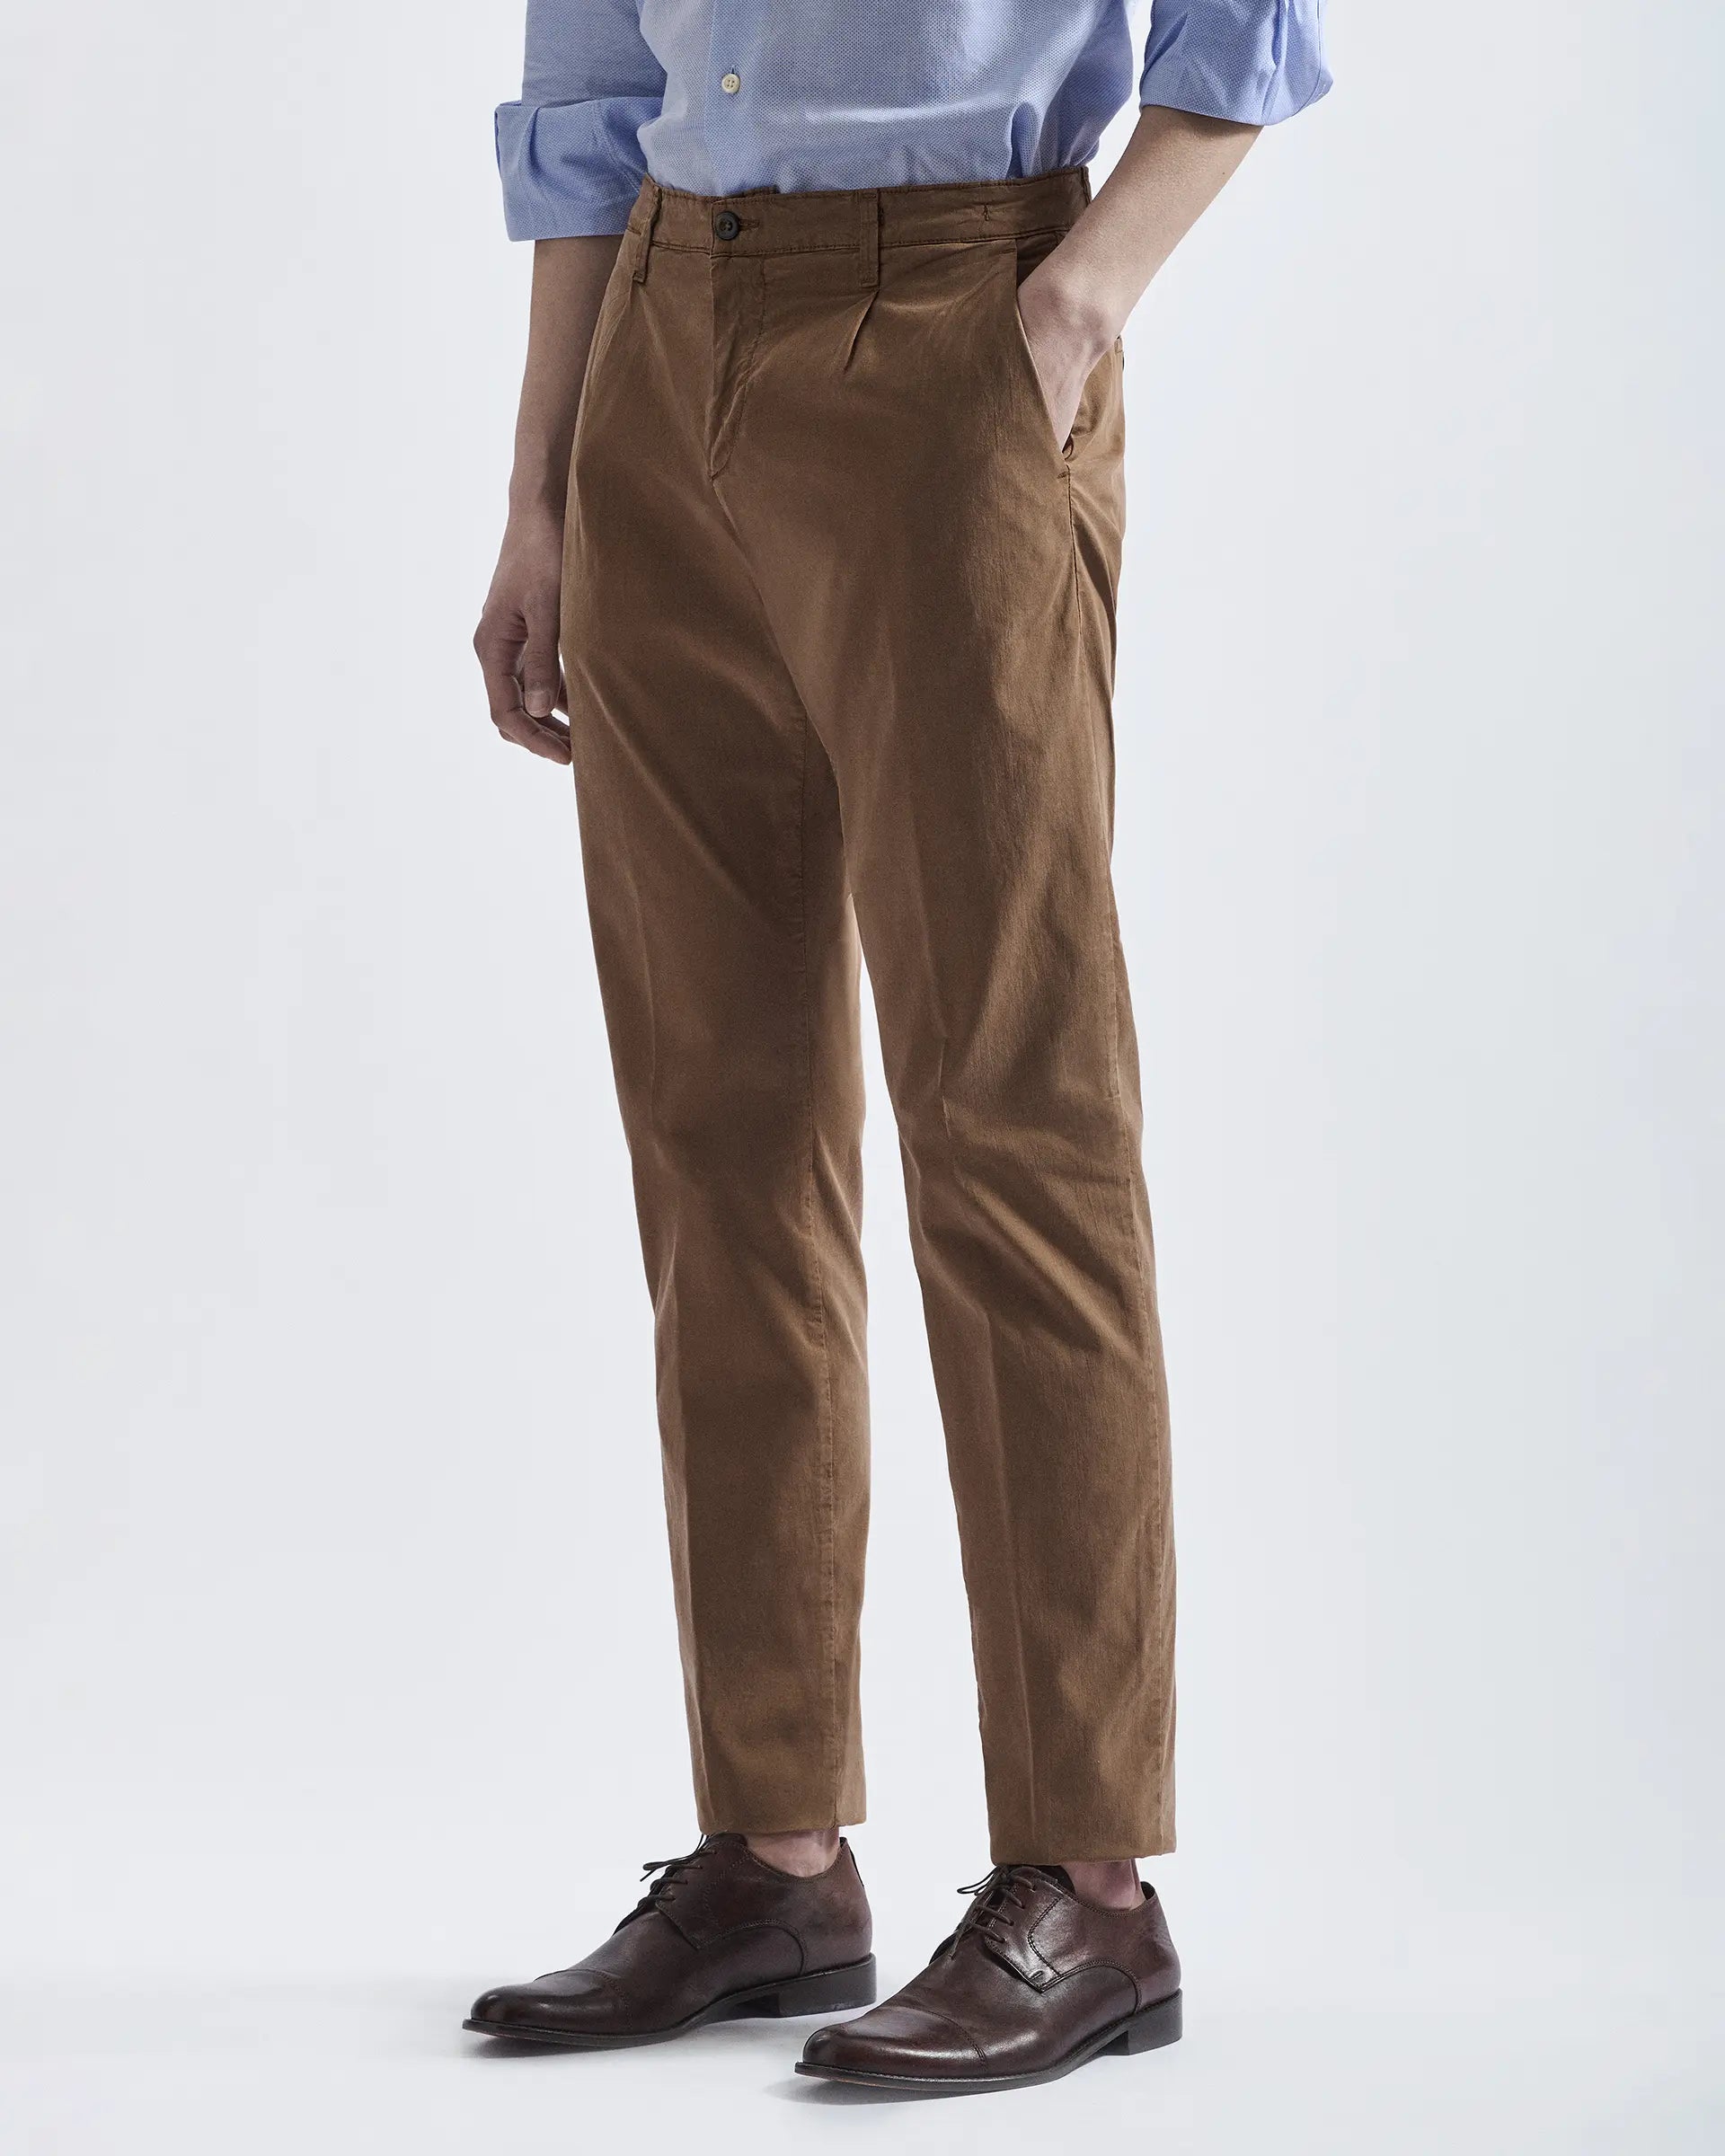 Brown 1 Pleats Tencel and Cotton Stretch Pants